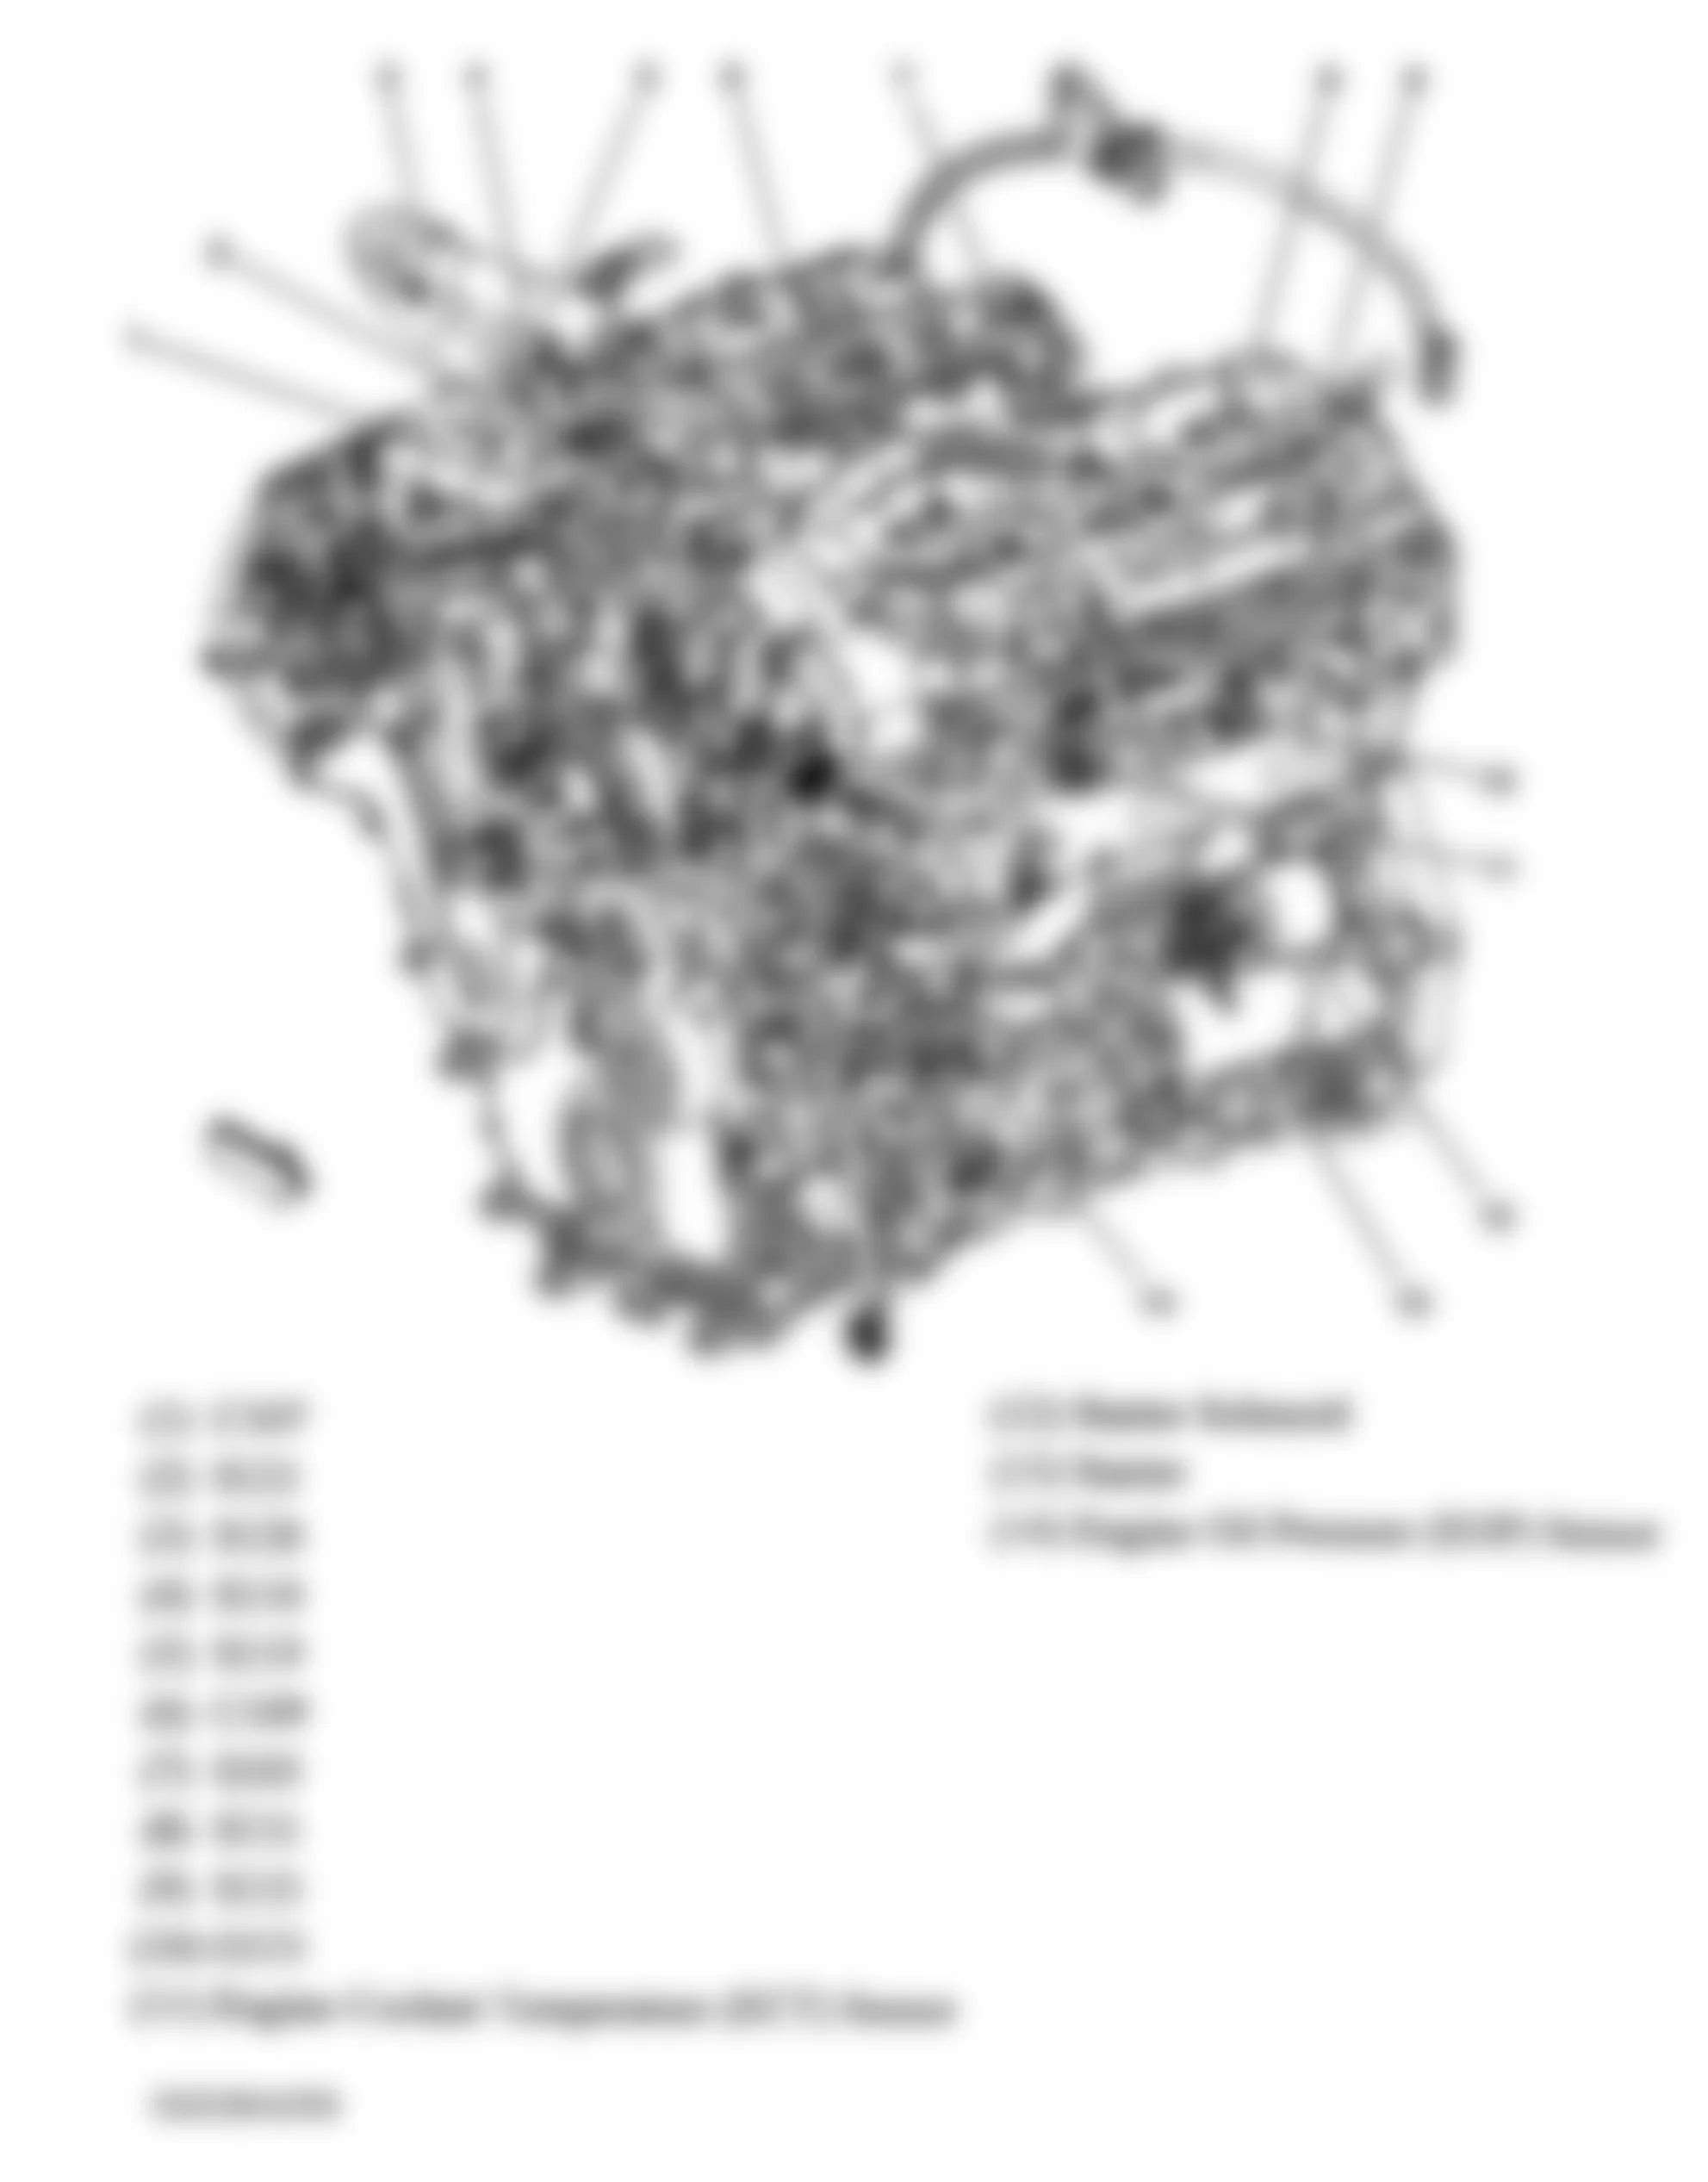 Buick Allure CXL 2006 - Component Locations -  Front Of Engine (3.6L)